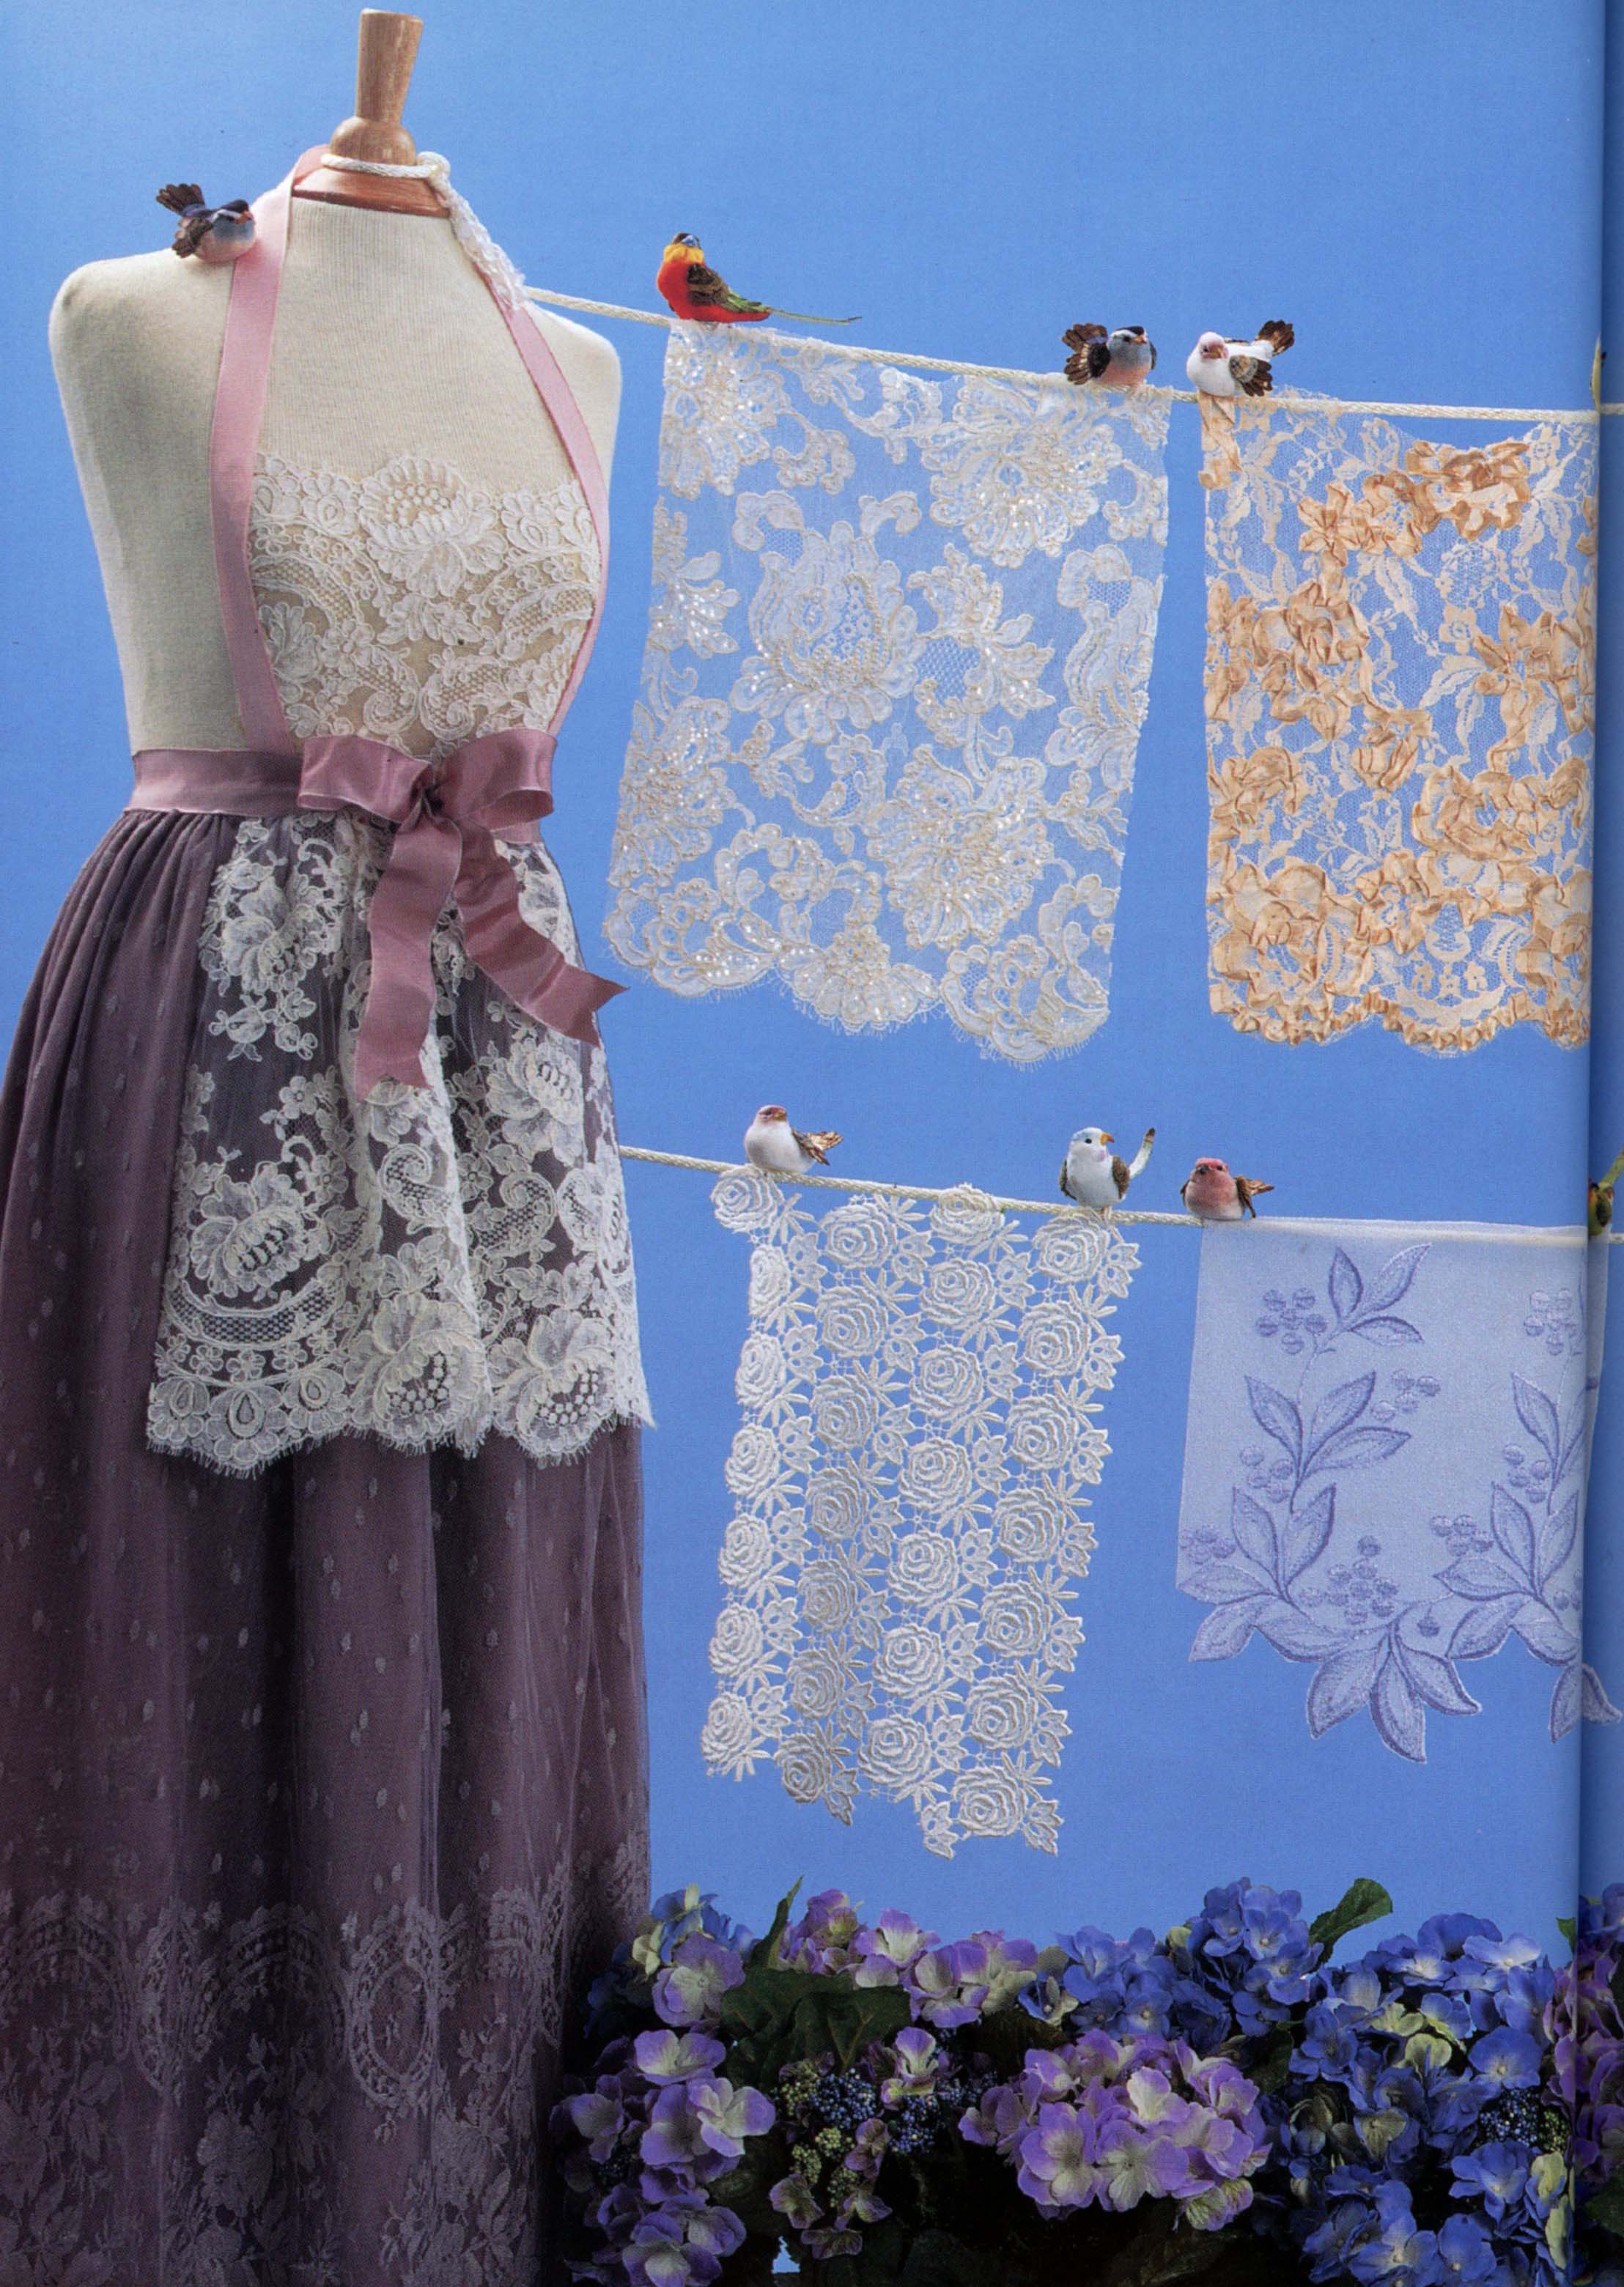 Artfully displayed lace samples from "Bridal Couture"